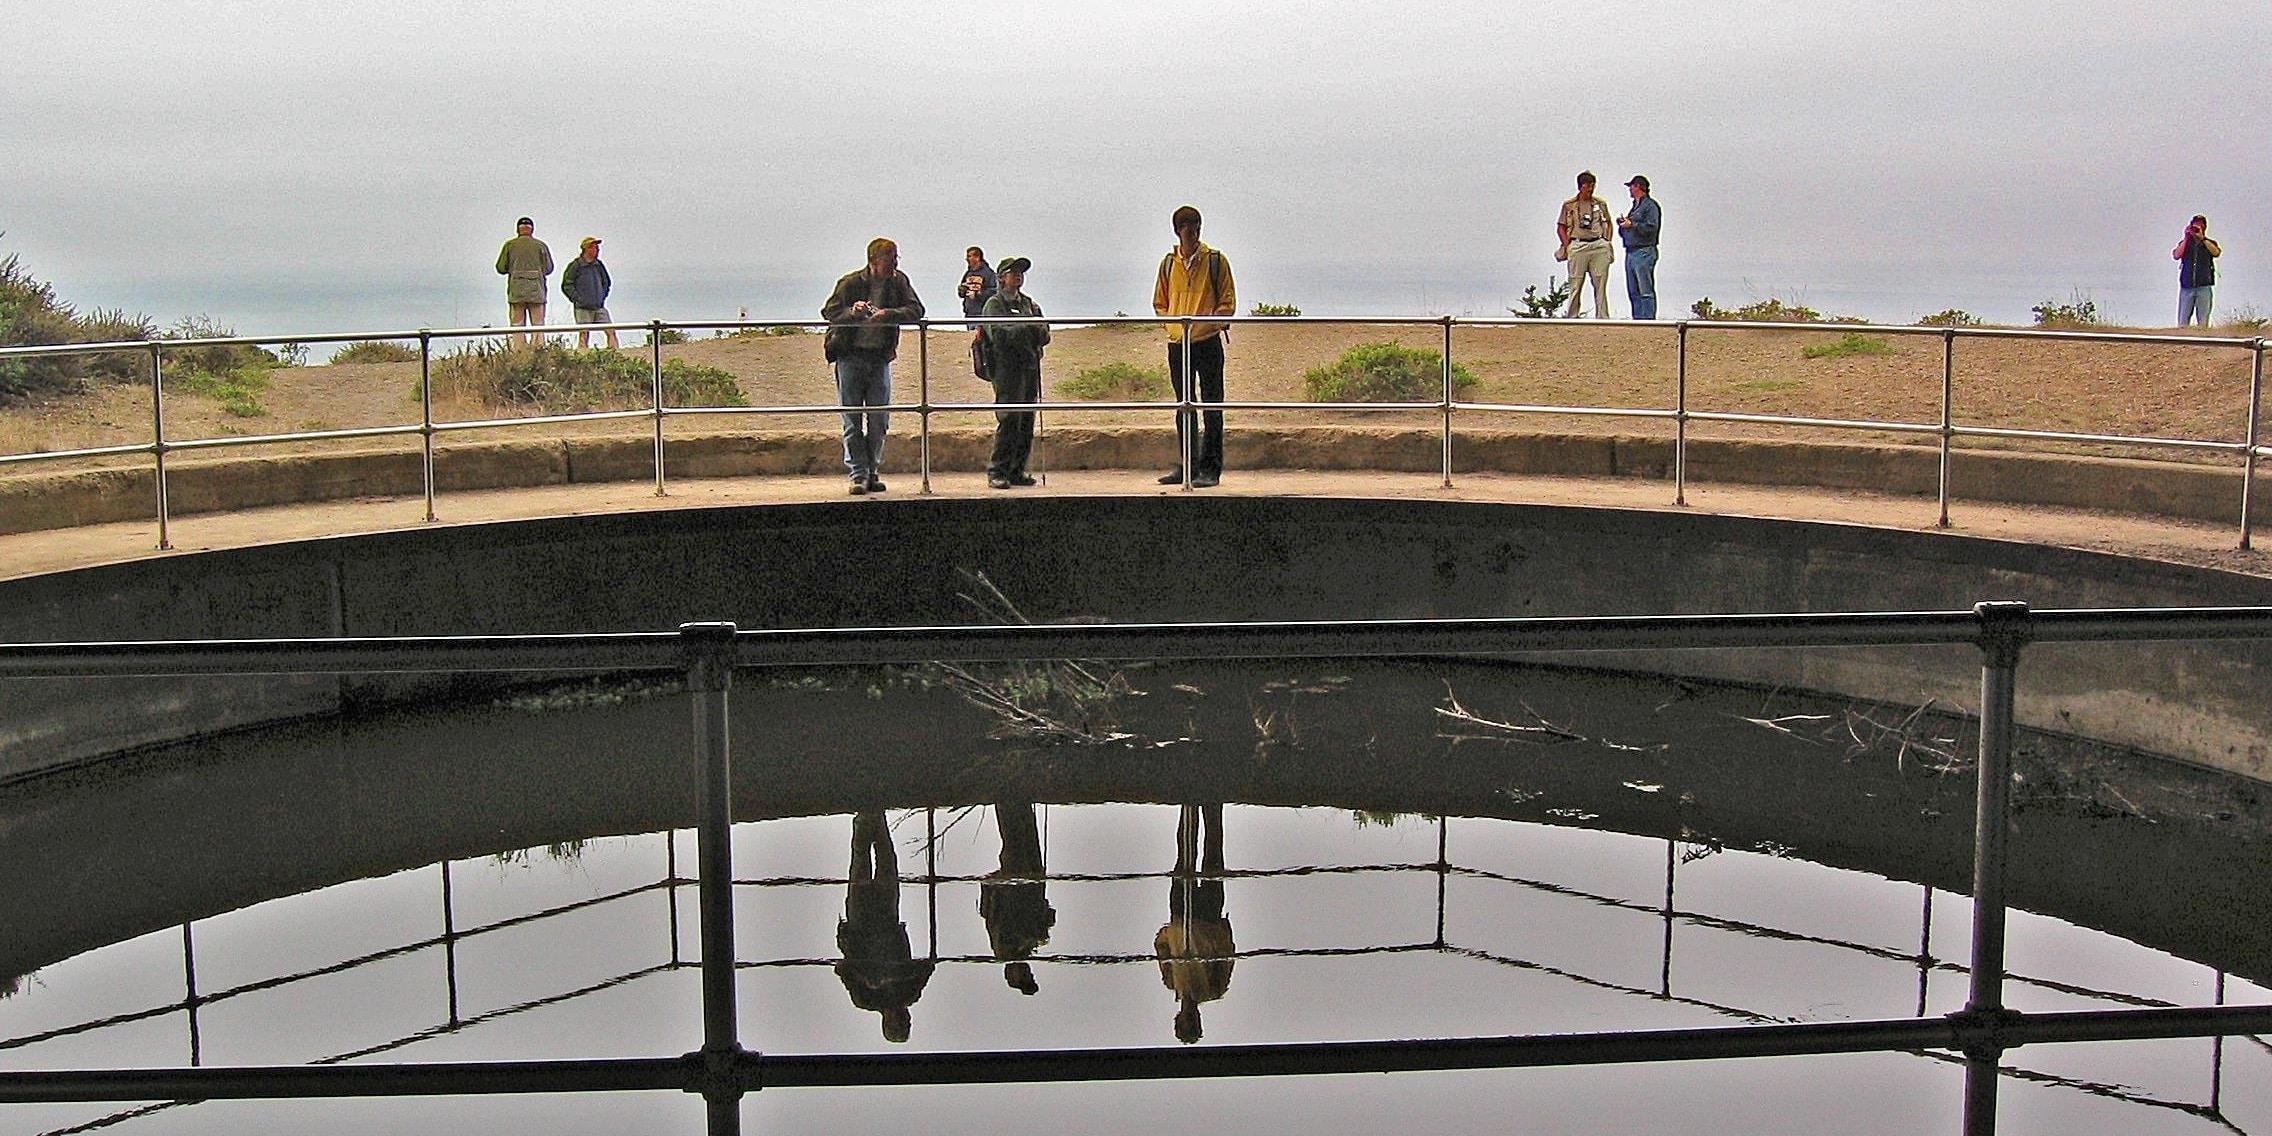 Battery Townsley "pond" in a former gun emplacement